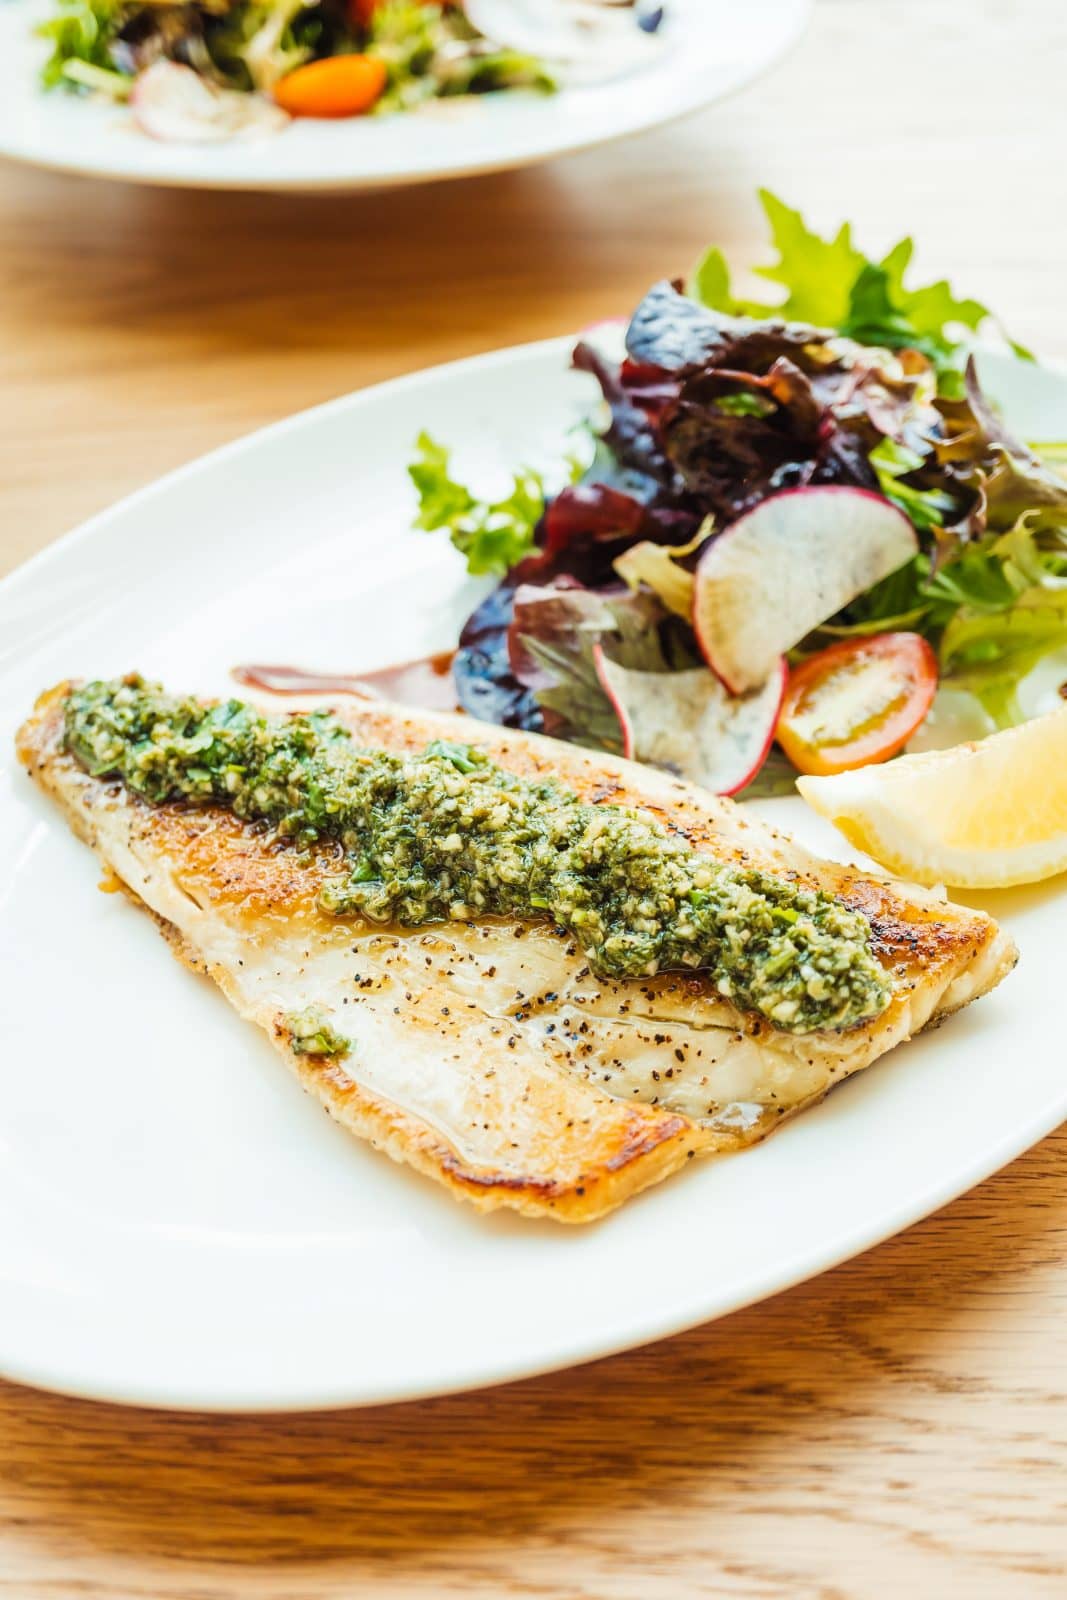 Grilled fish with pesto sauce with a side of vegetables